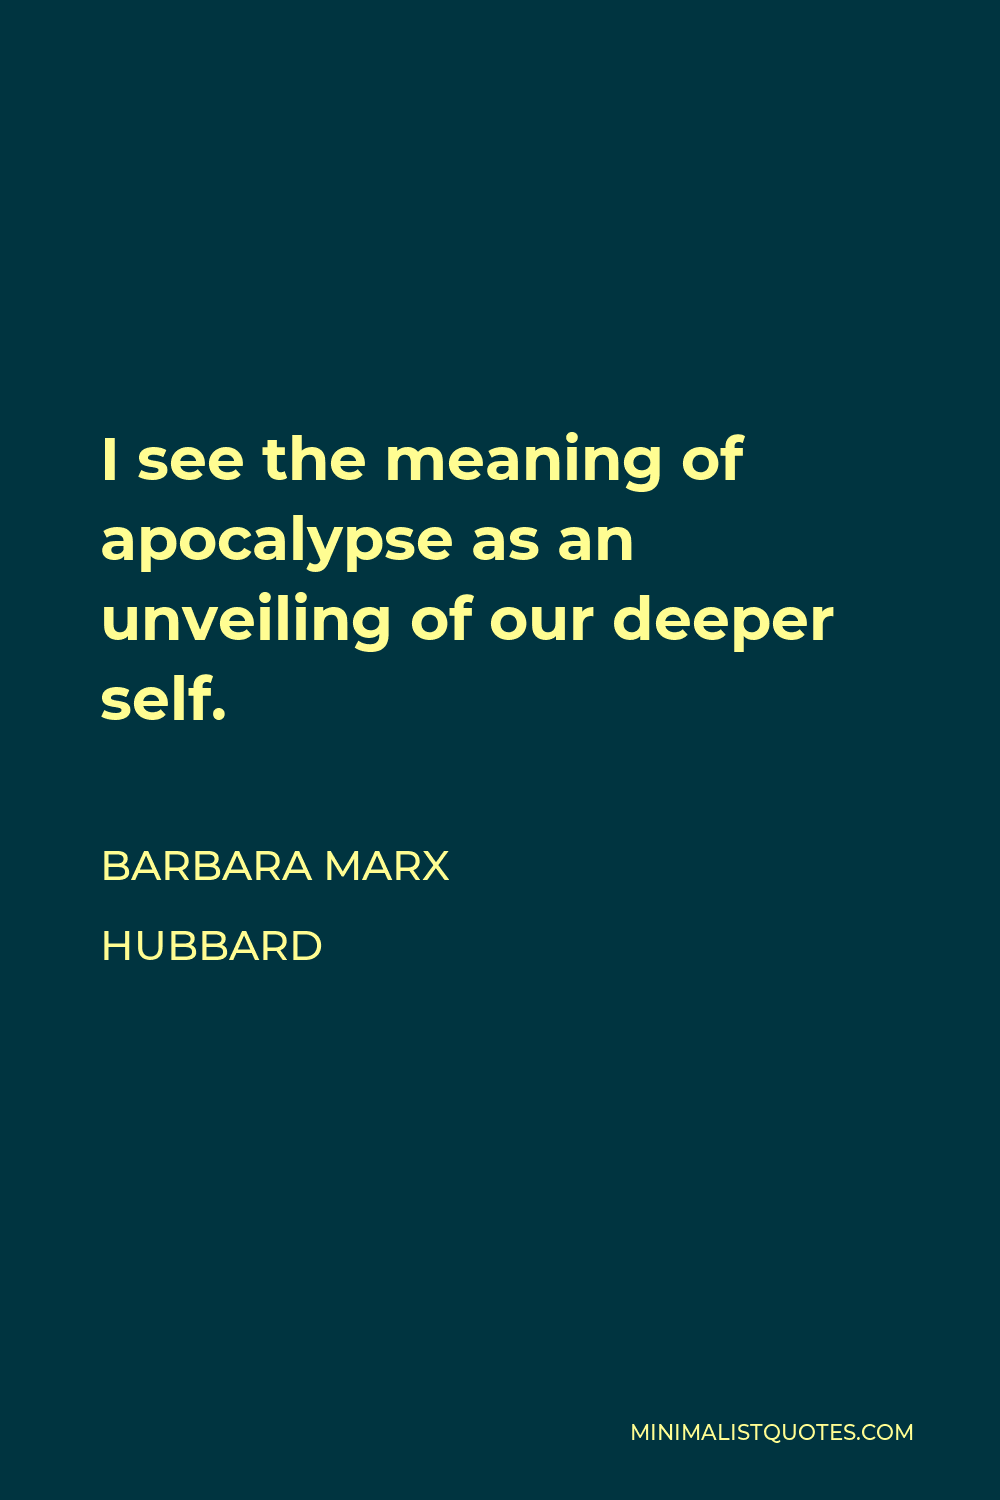 Barbara Marx Hubbard Quote - I see the meaning of apocalypse as an unveiling of our deeper self.